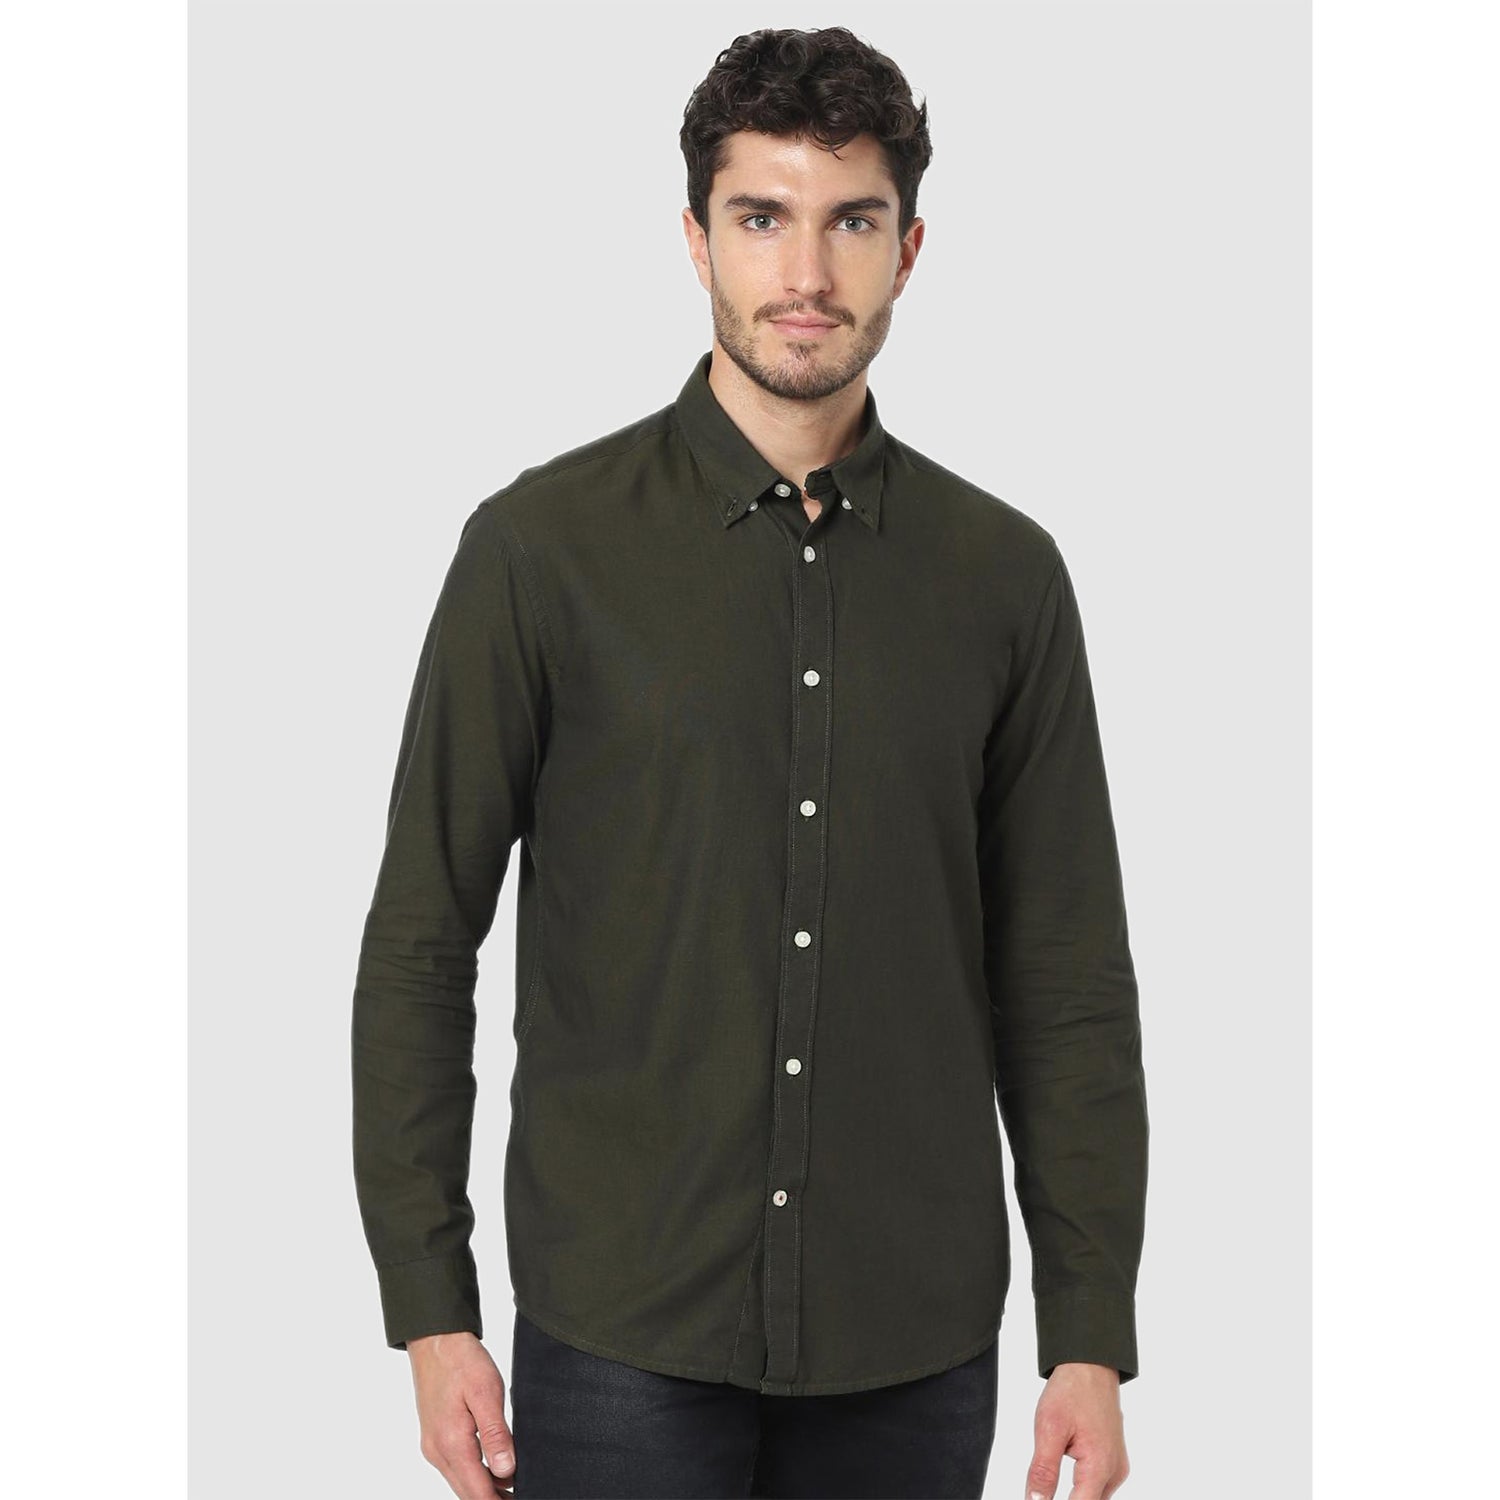 Olive Green Classic Casual Cotton Shirt (CAPINPOINT)